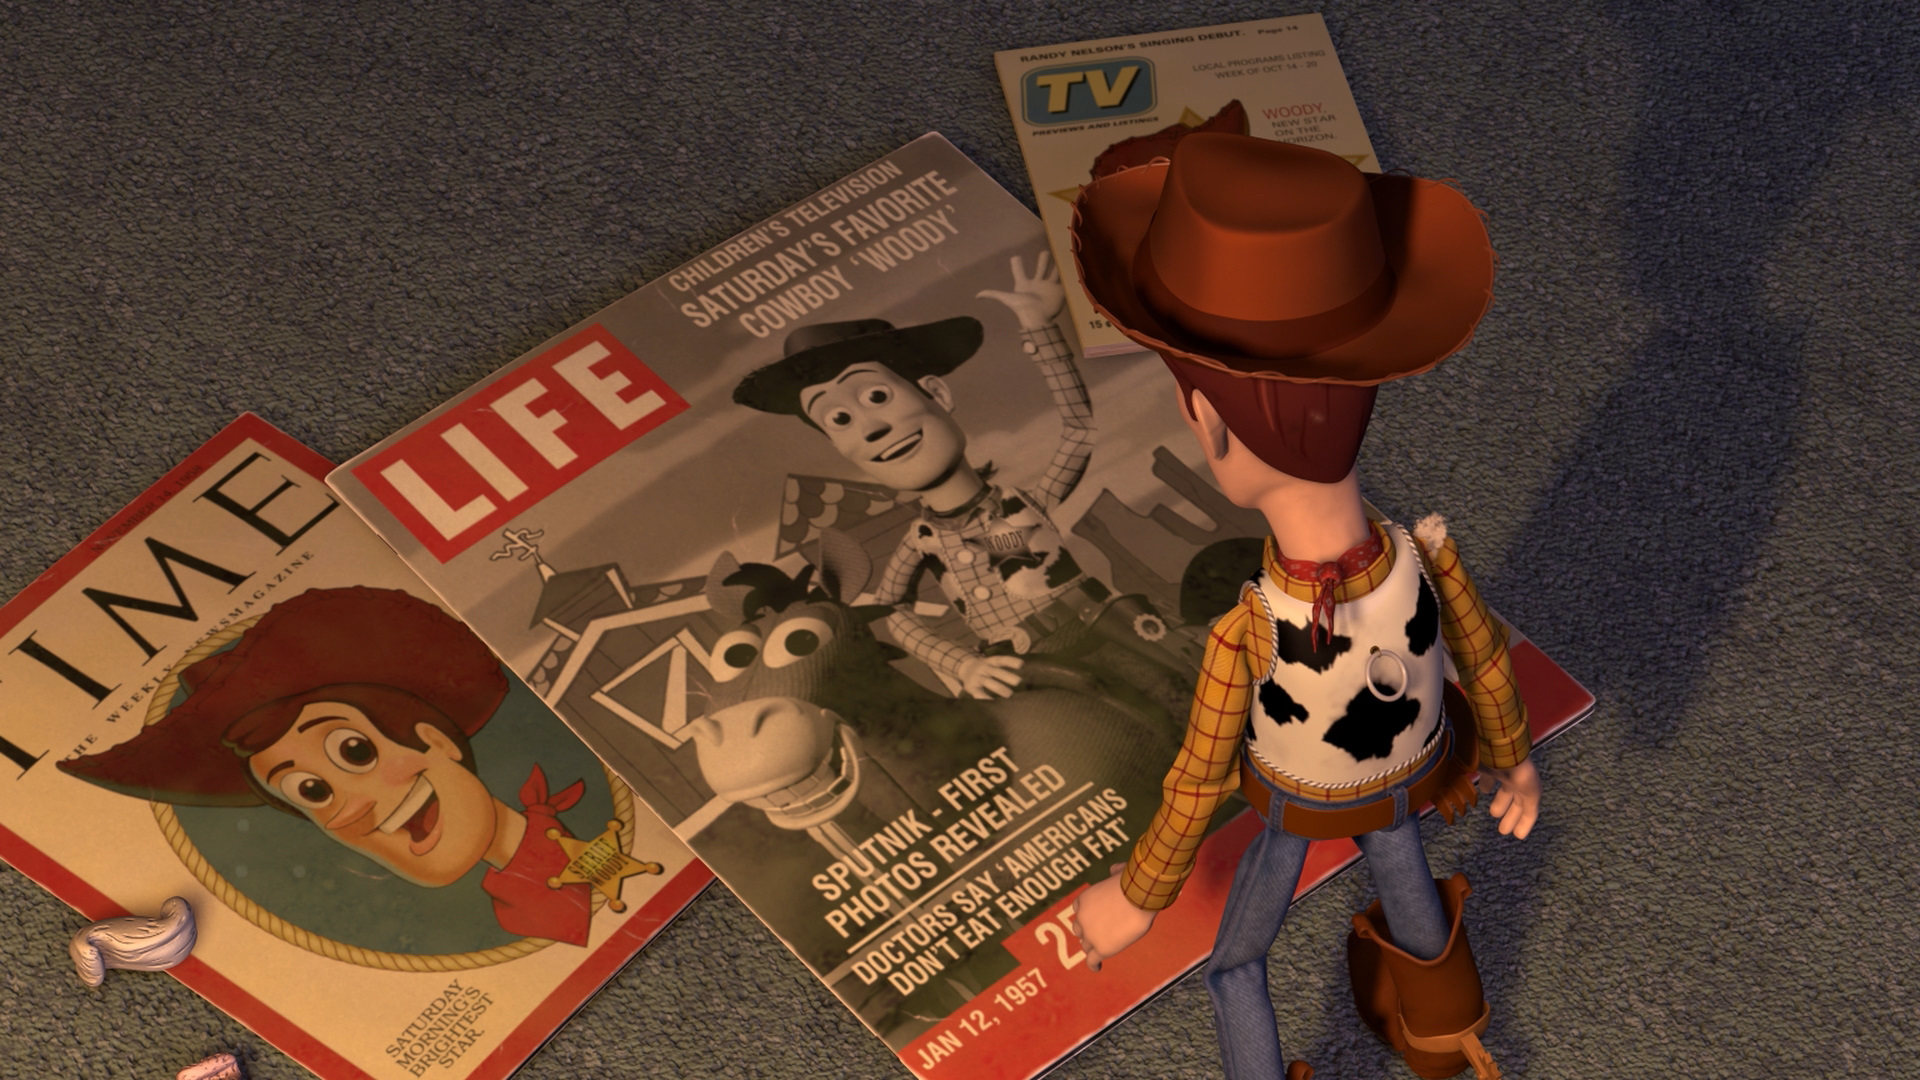 Toy Story 2 Blu-ray Review